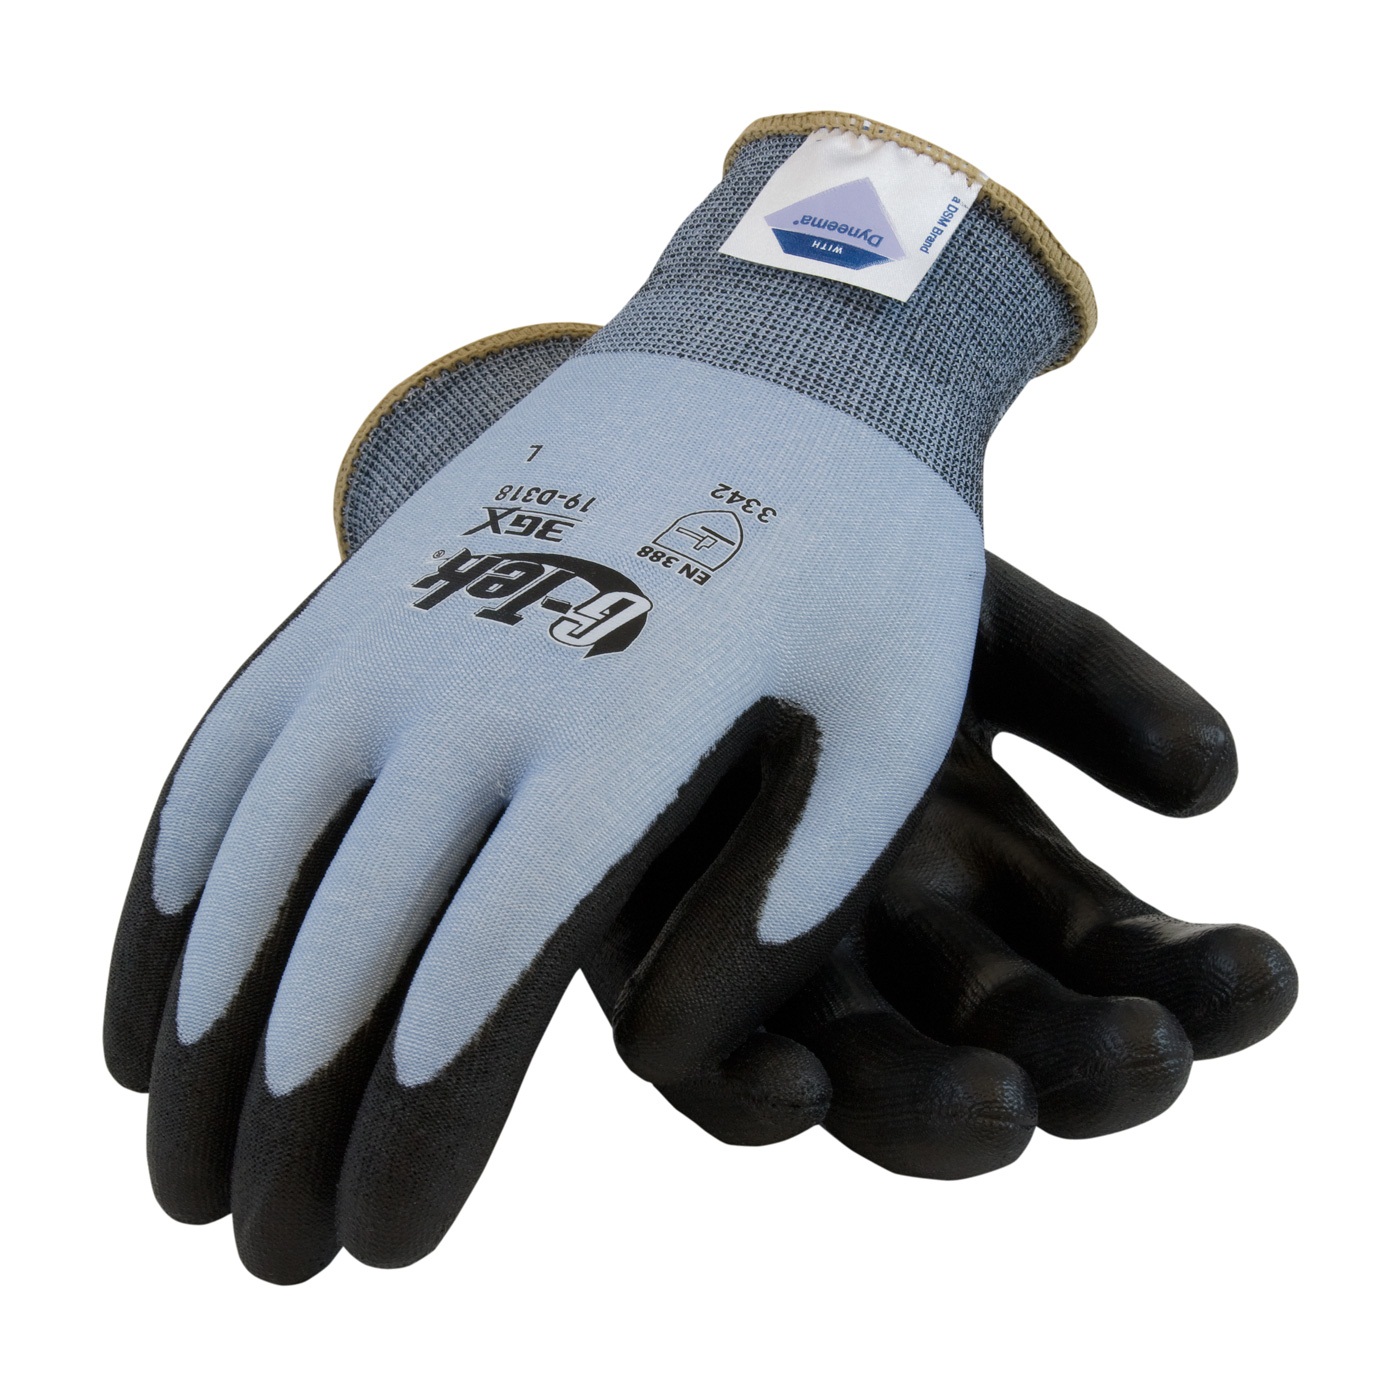 G-Tek 19-D318 Diamond Technology Gloves With Dyneema, 12 Pairs from Columbia Safety